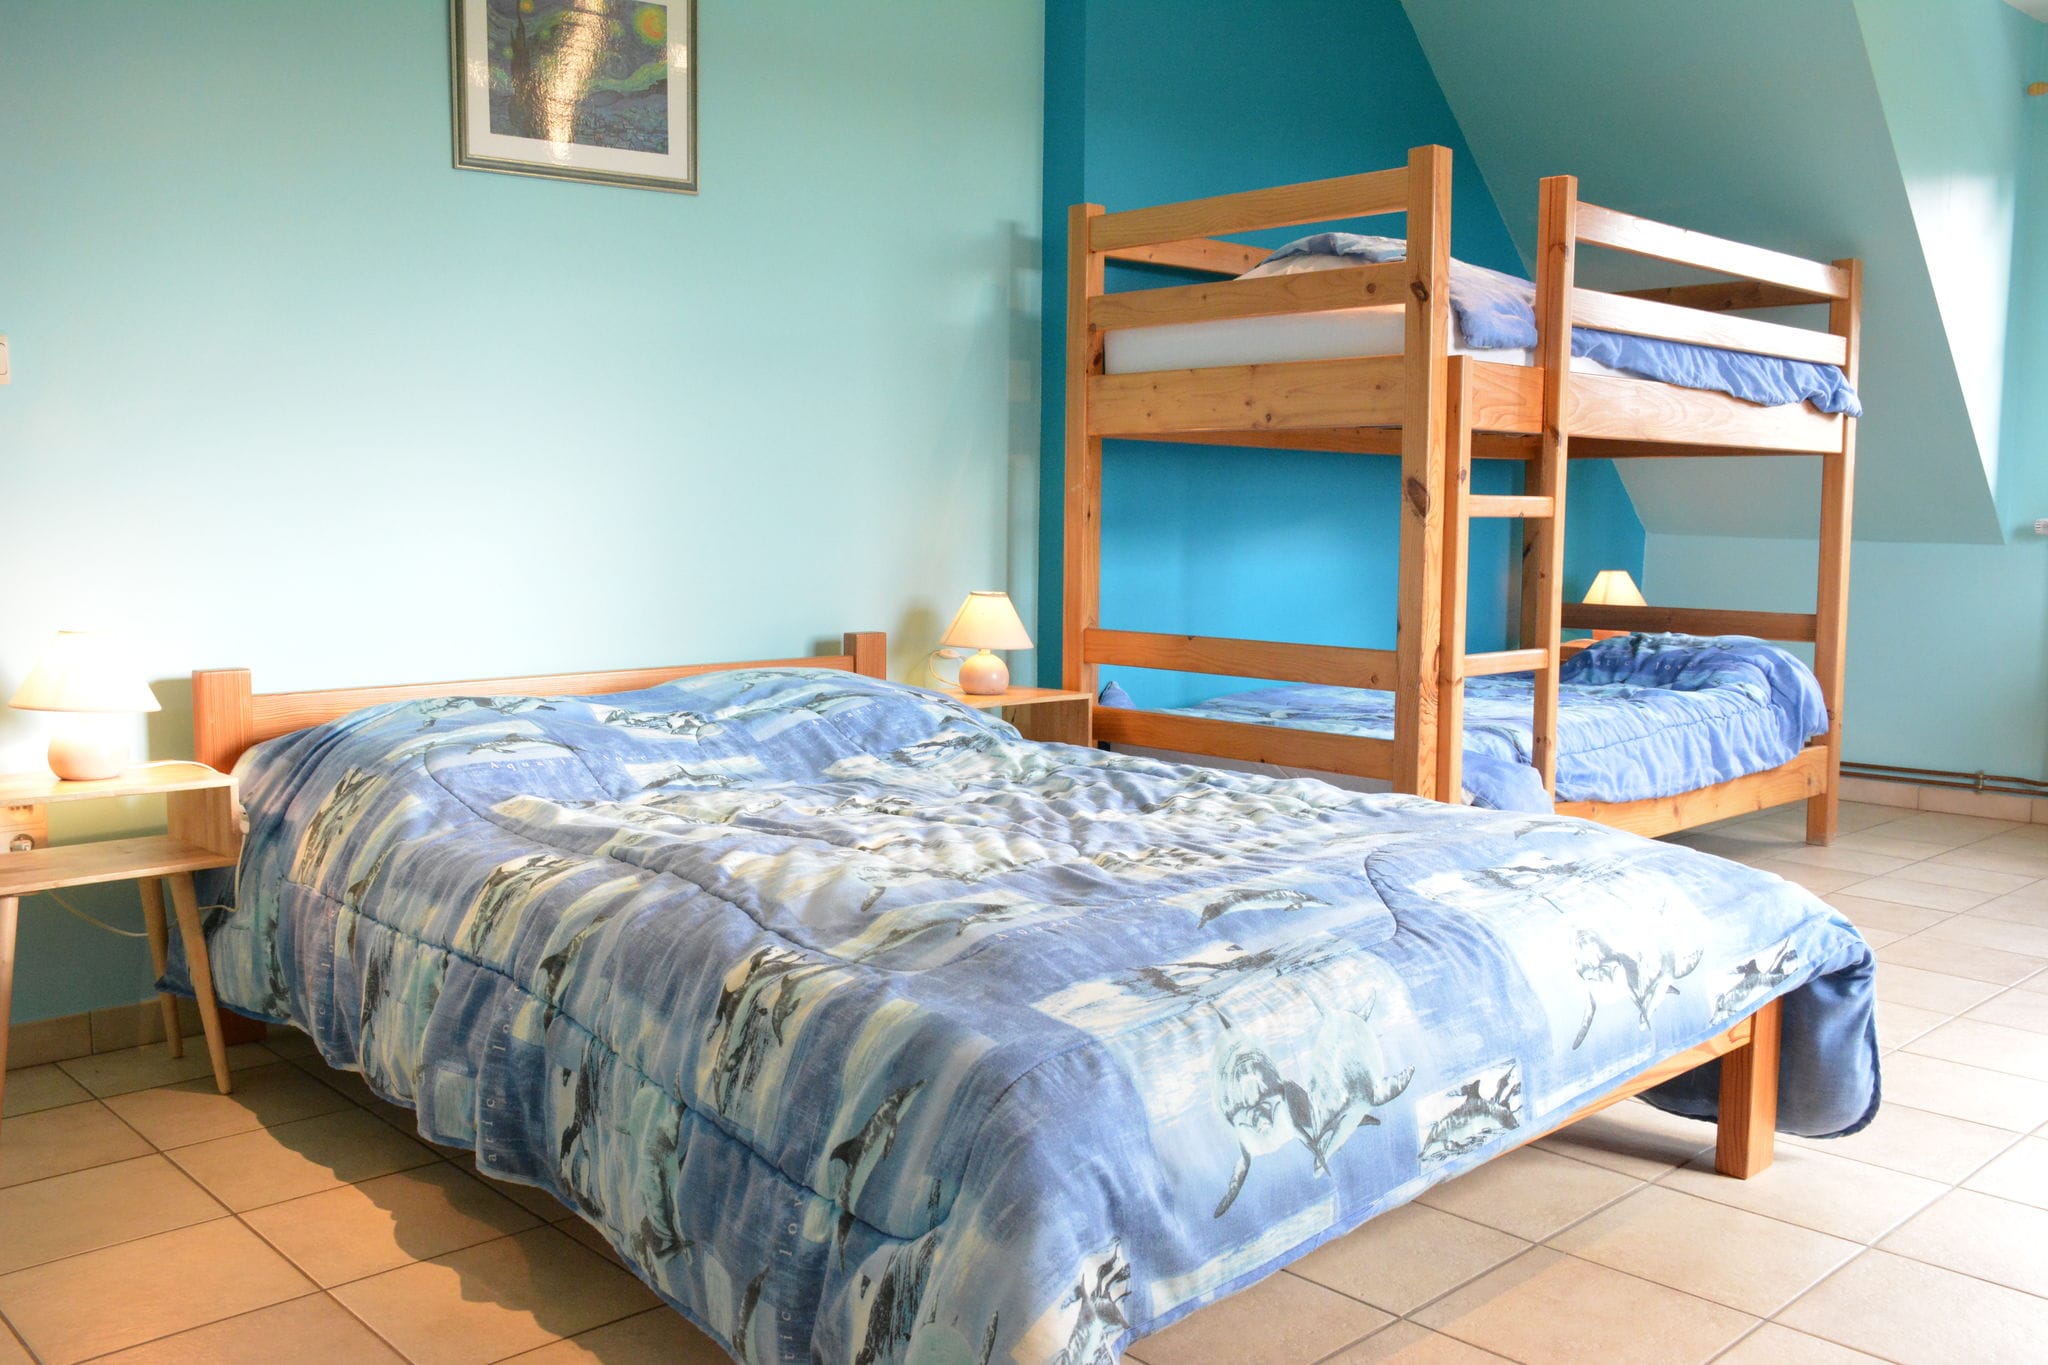 Comfortable villa, sauna, lots of games, perfect for families with children